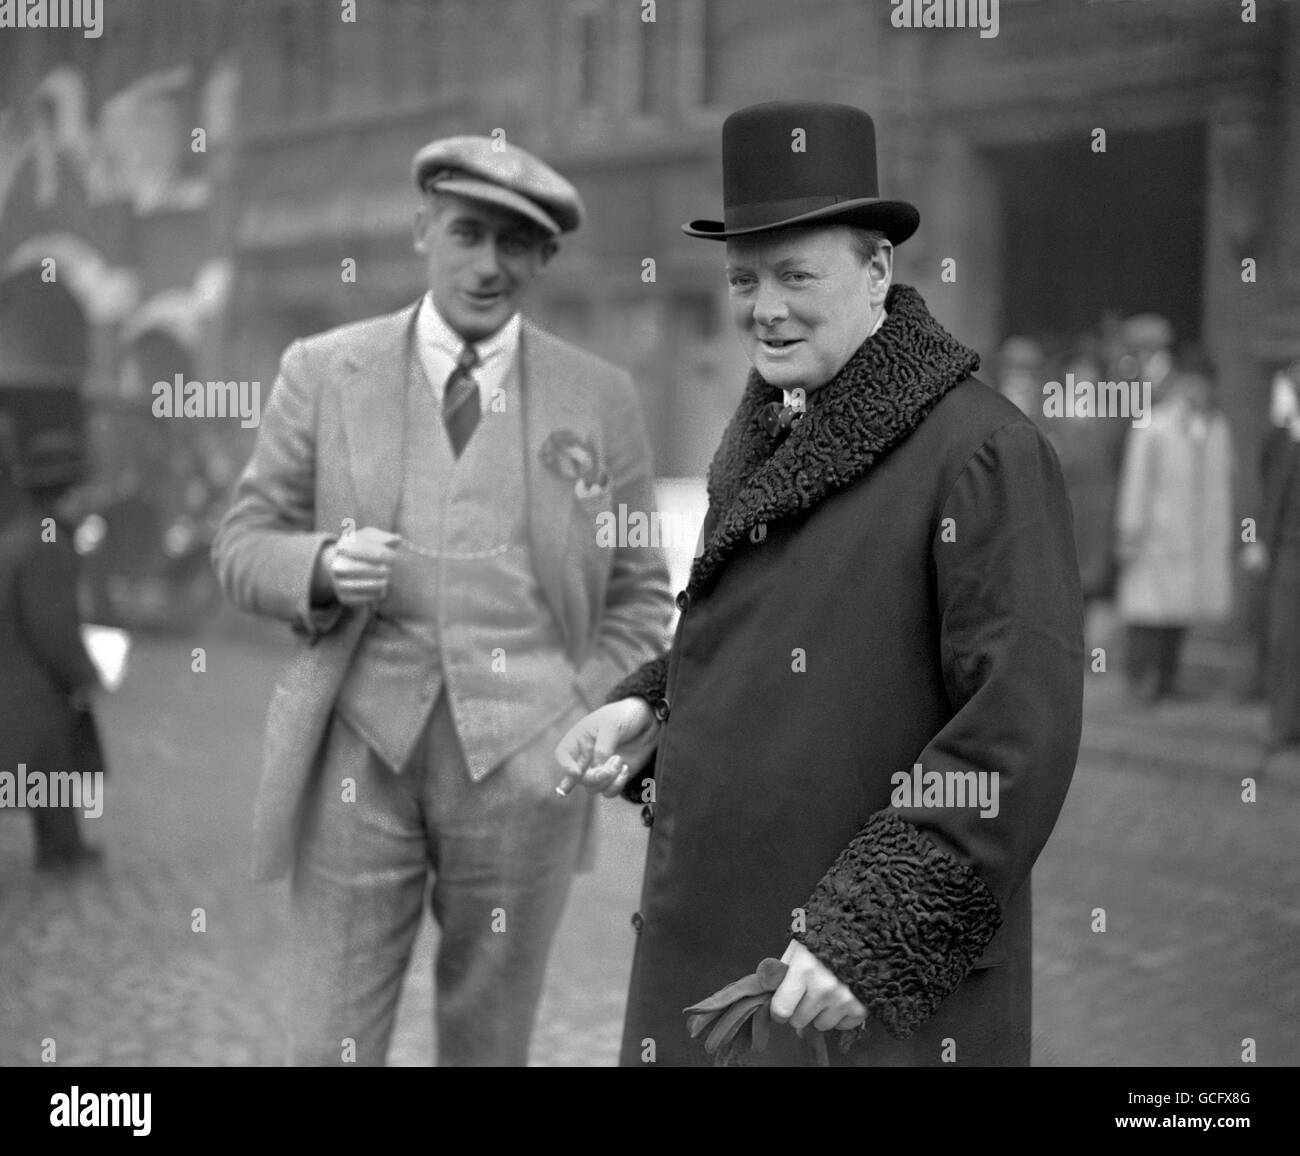 Politics - The Liberal Party - Winston Churchill - Leicester Stock ...